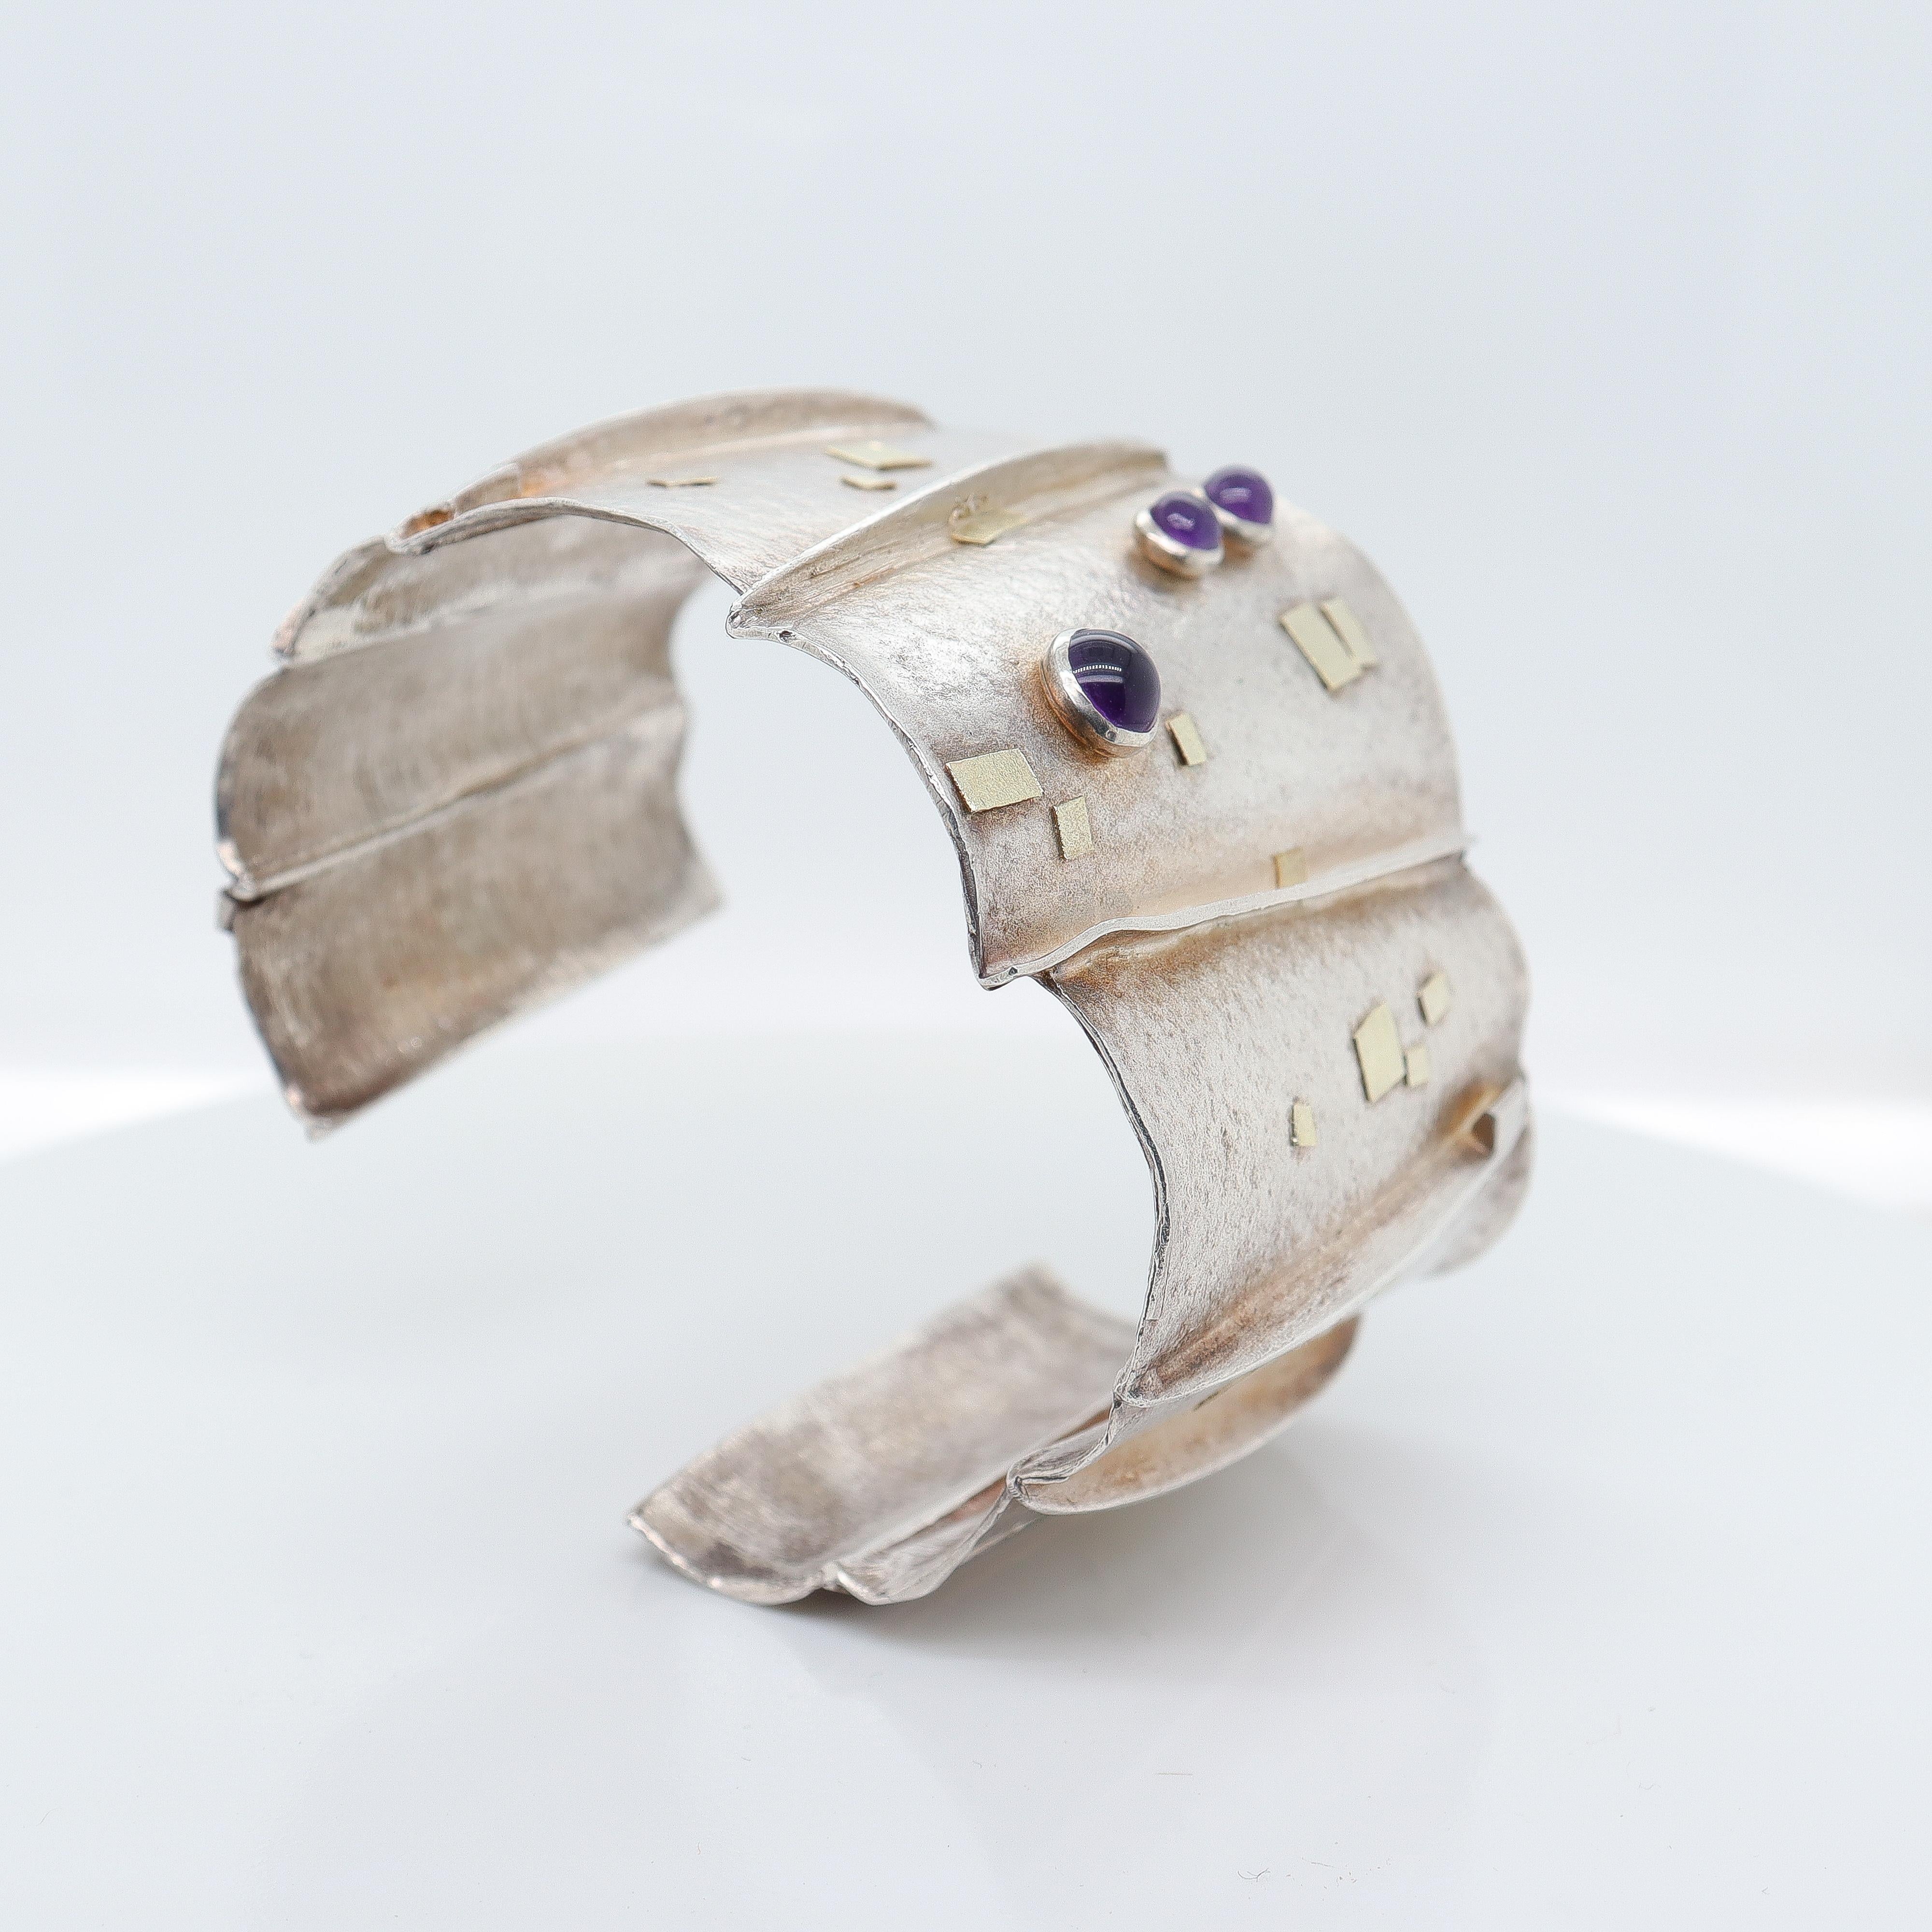 Modernist Silver, Gold, & Amethyst Cuff Bracelet Attributed to Enid Kaplan For Sale 3